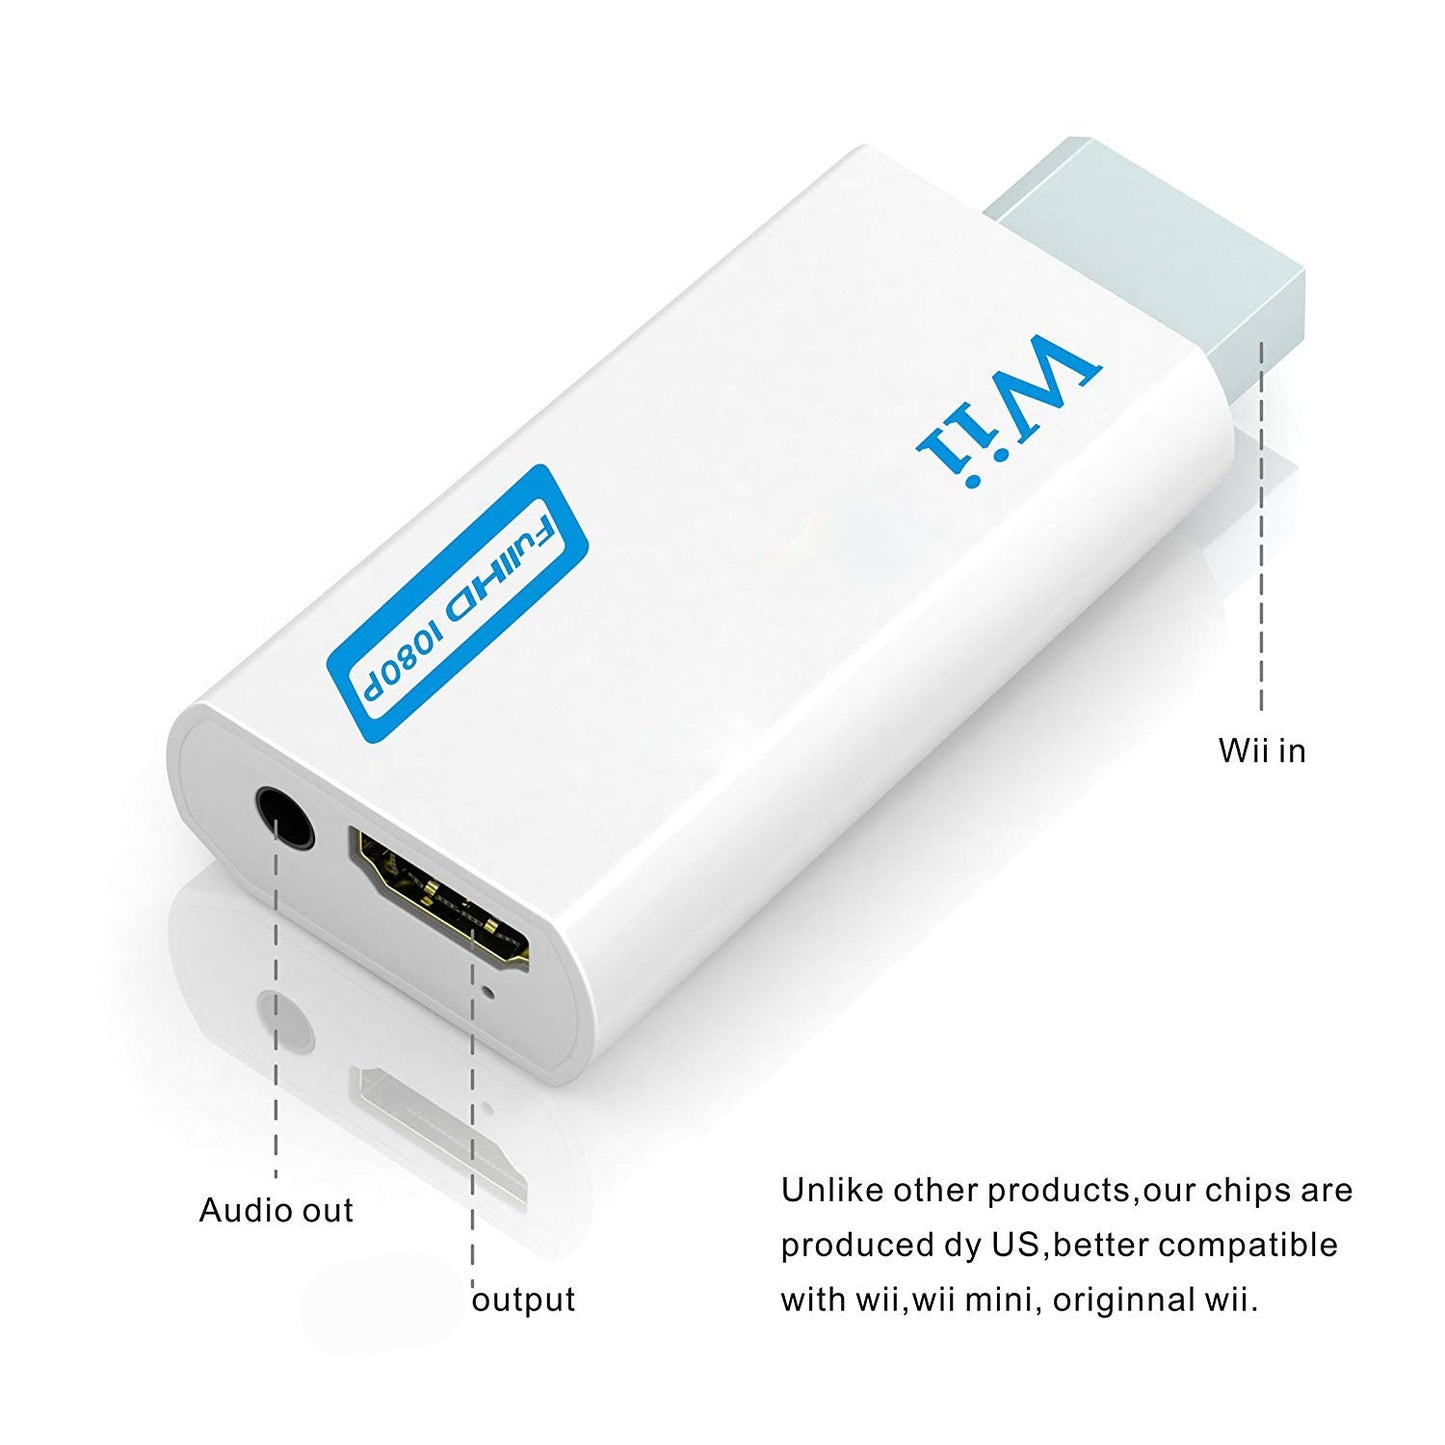 Full HD 1080P Wii to HDMI-compatible Converter Adapter Wii2HDMI-compatible Converter 3.5mm Audio for PC HDTV Monitor Display